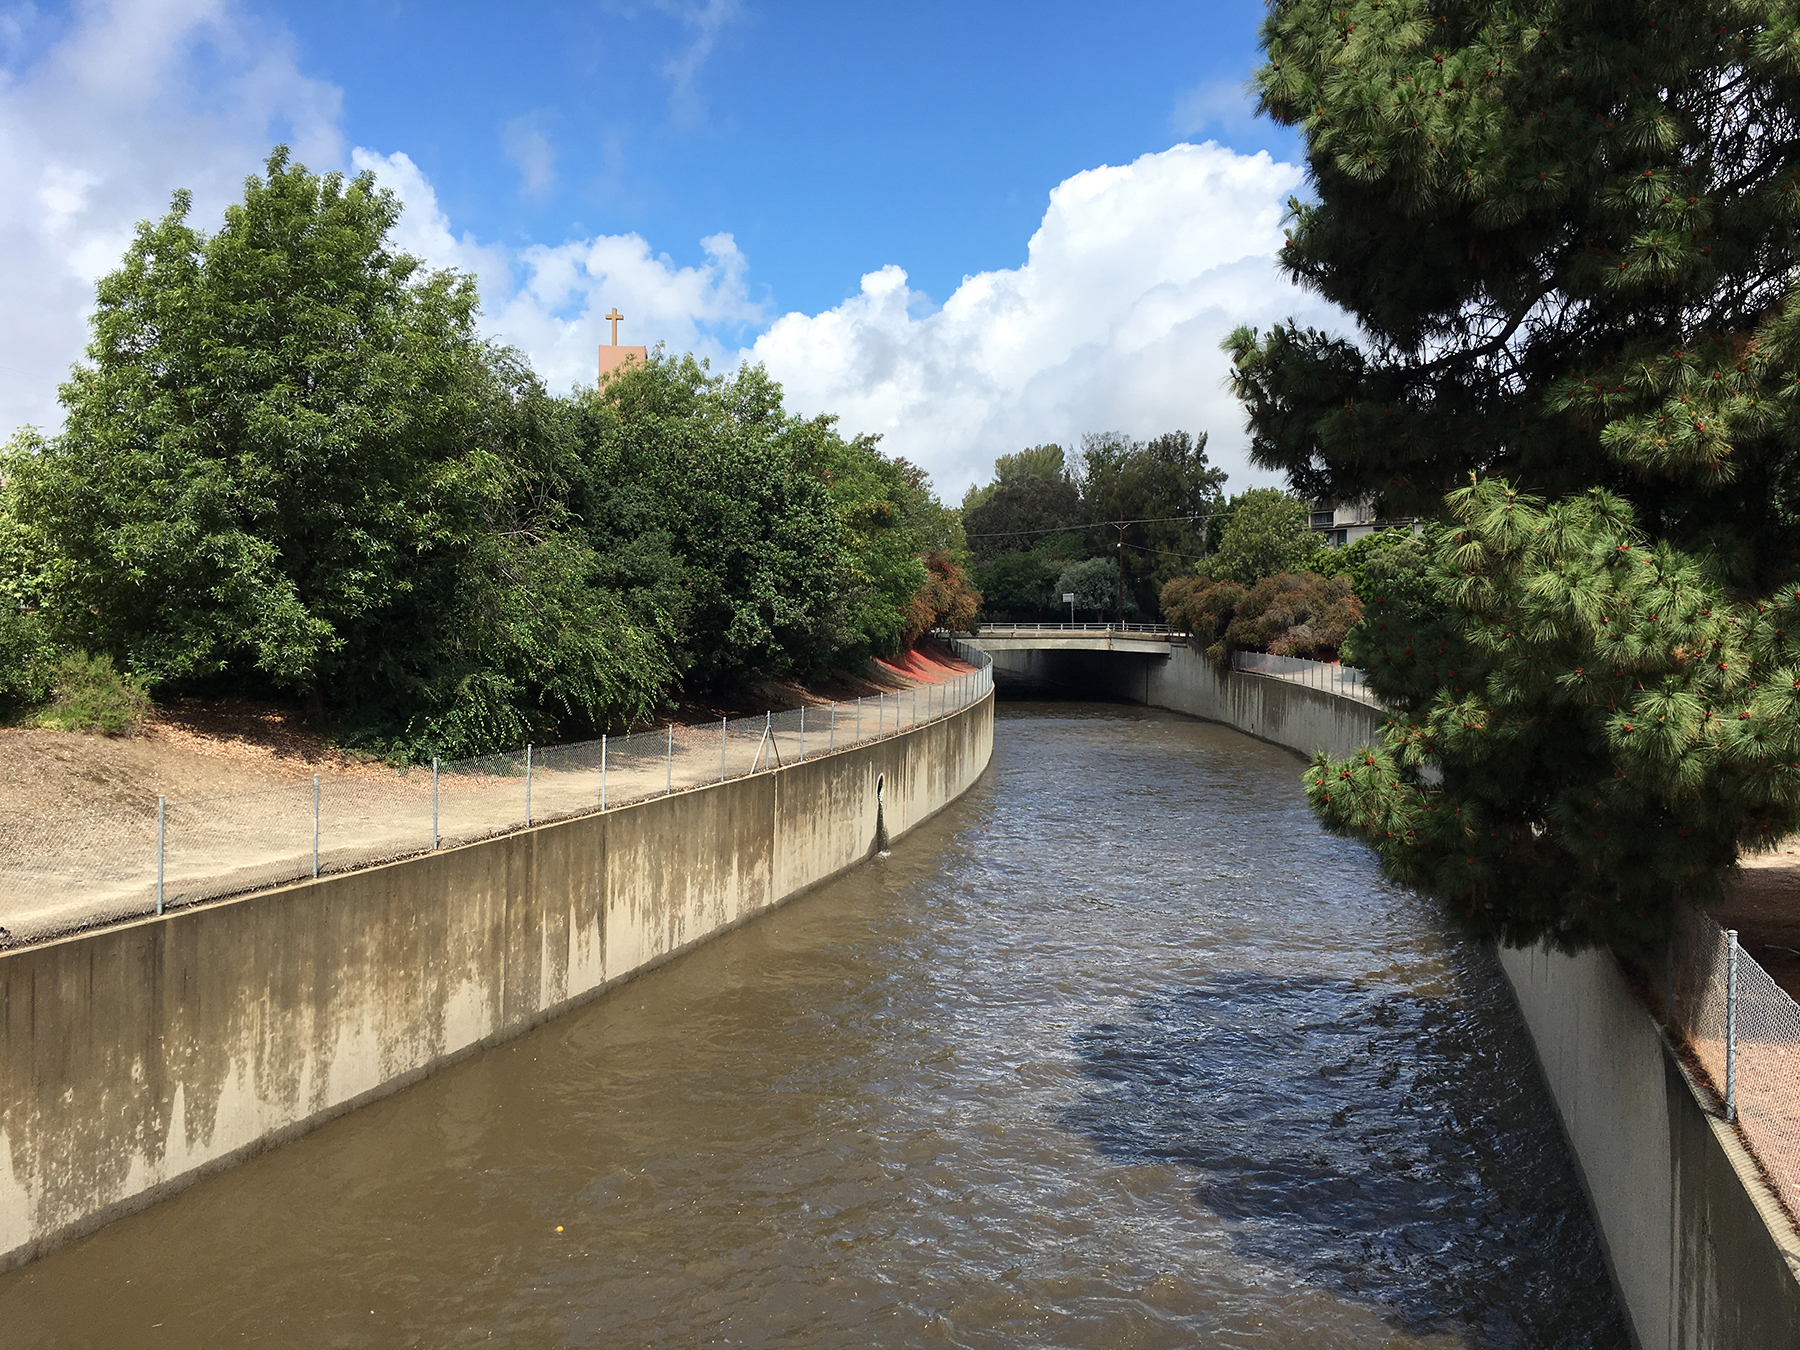 During dry weather, the heavily modified Los Angeles River, shown here below Sepulveda Dam, consists mainly of treated wastewater effluent. (Image courtesy of Jordyn Wolfand)